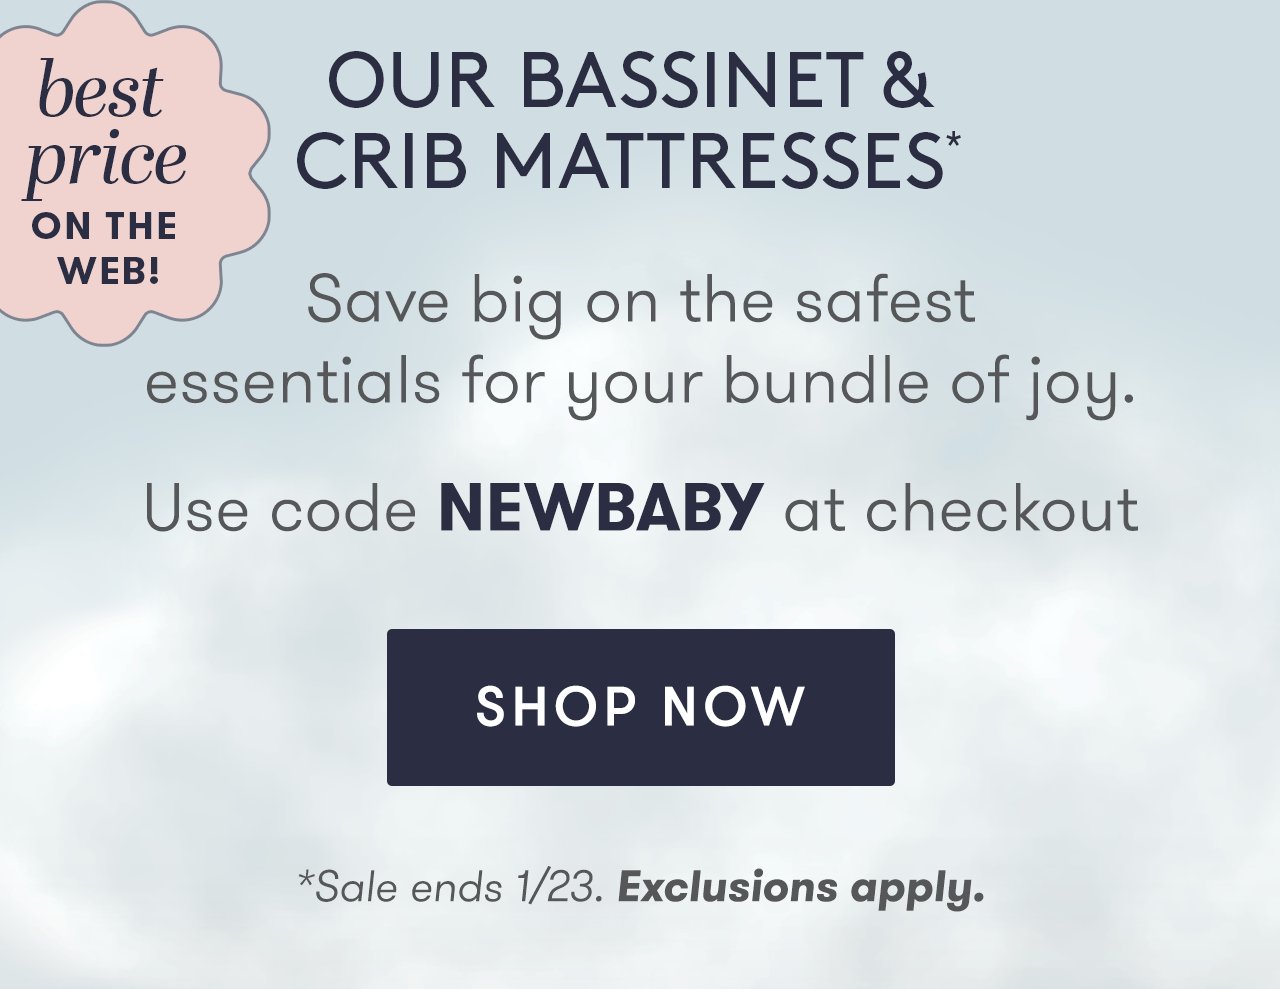 Take 20% off our Bassinet & Crib Mattresses* with code NEWBABY at checkout